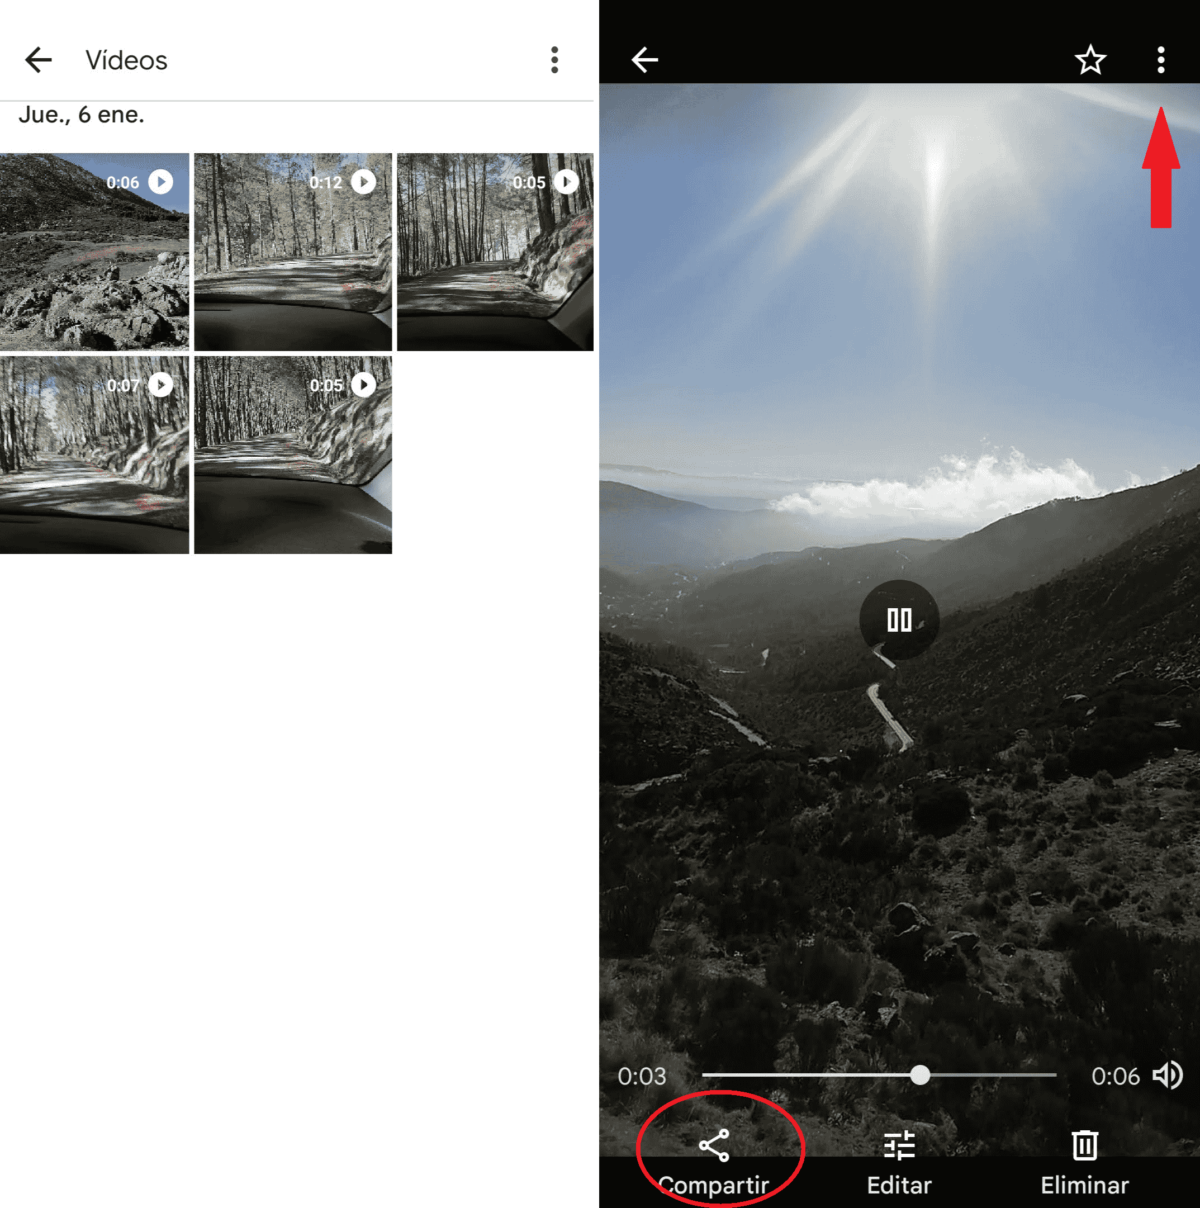 How to download and share videos from Google Photos